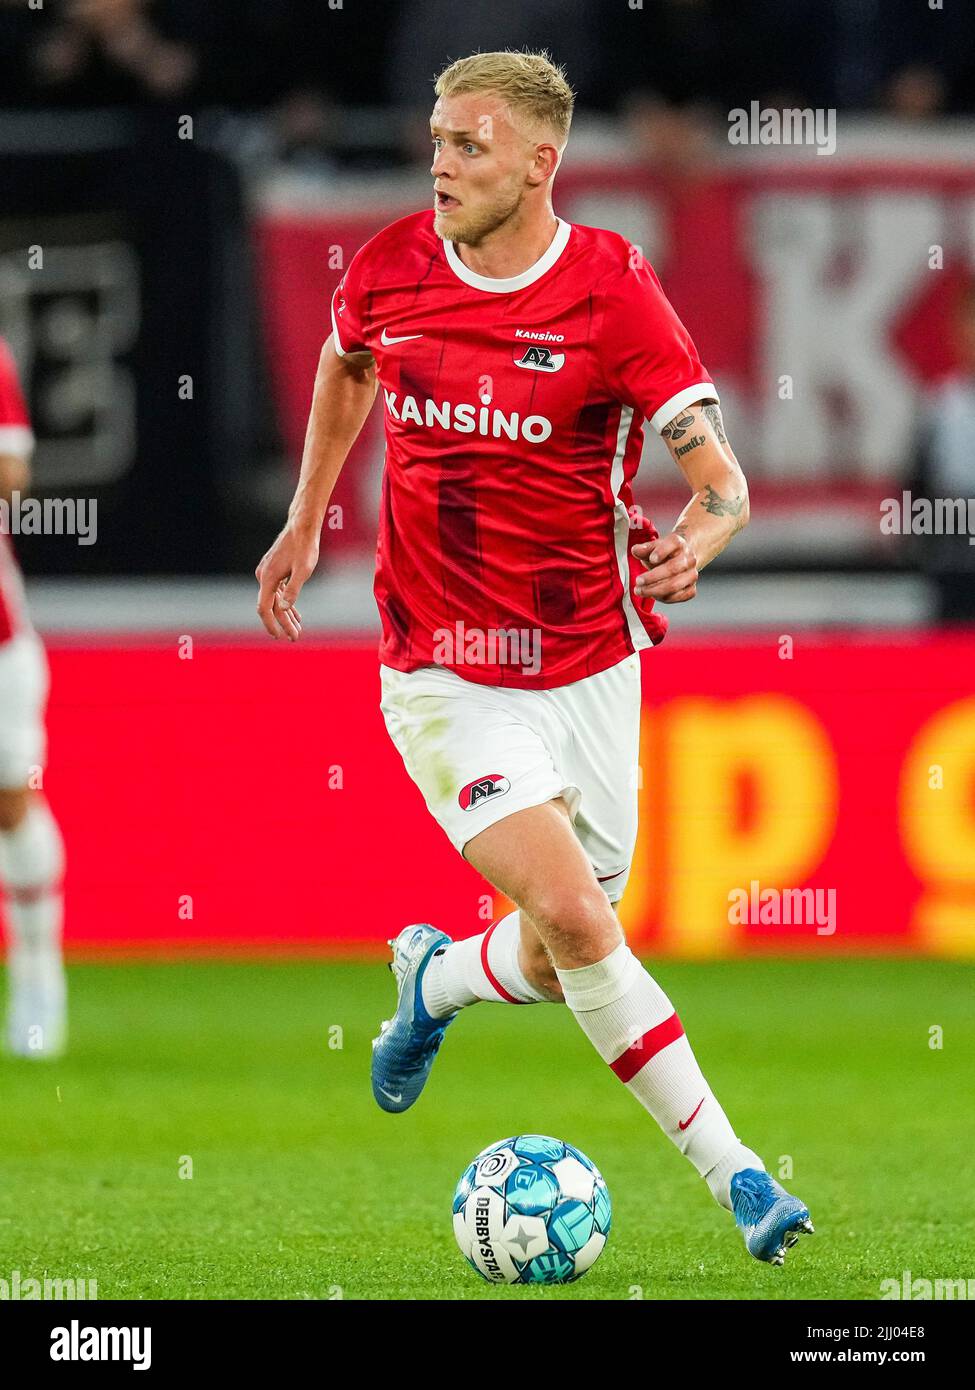 ALKMAAR - Jens Odgaard of AZ Alkmaar during the second heat of the Conference League match between AZ and FK Tuzla City at the AFAS stadium on July 21, 2022 in Alkmaar, Netherlands. ANP ED OF THE POL Stock Photo